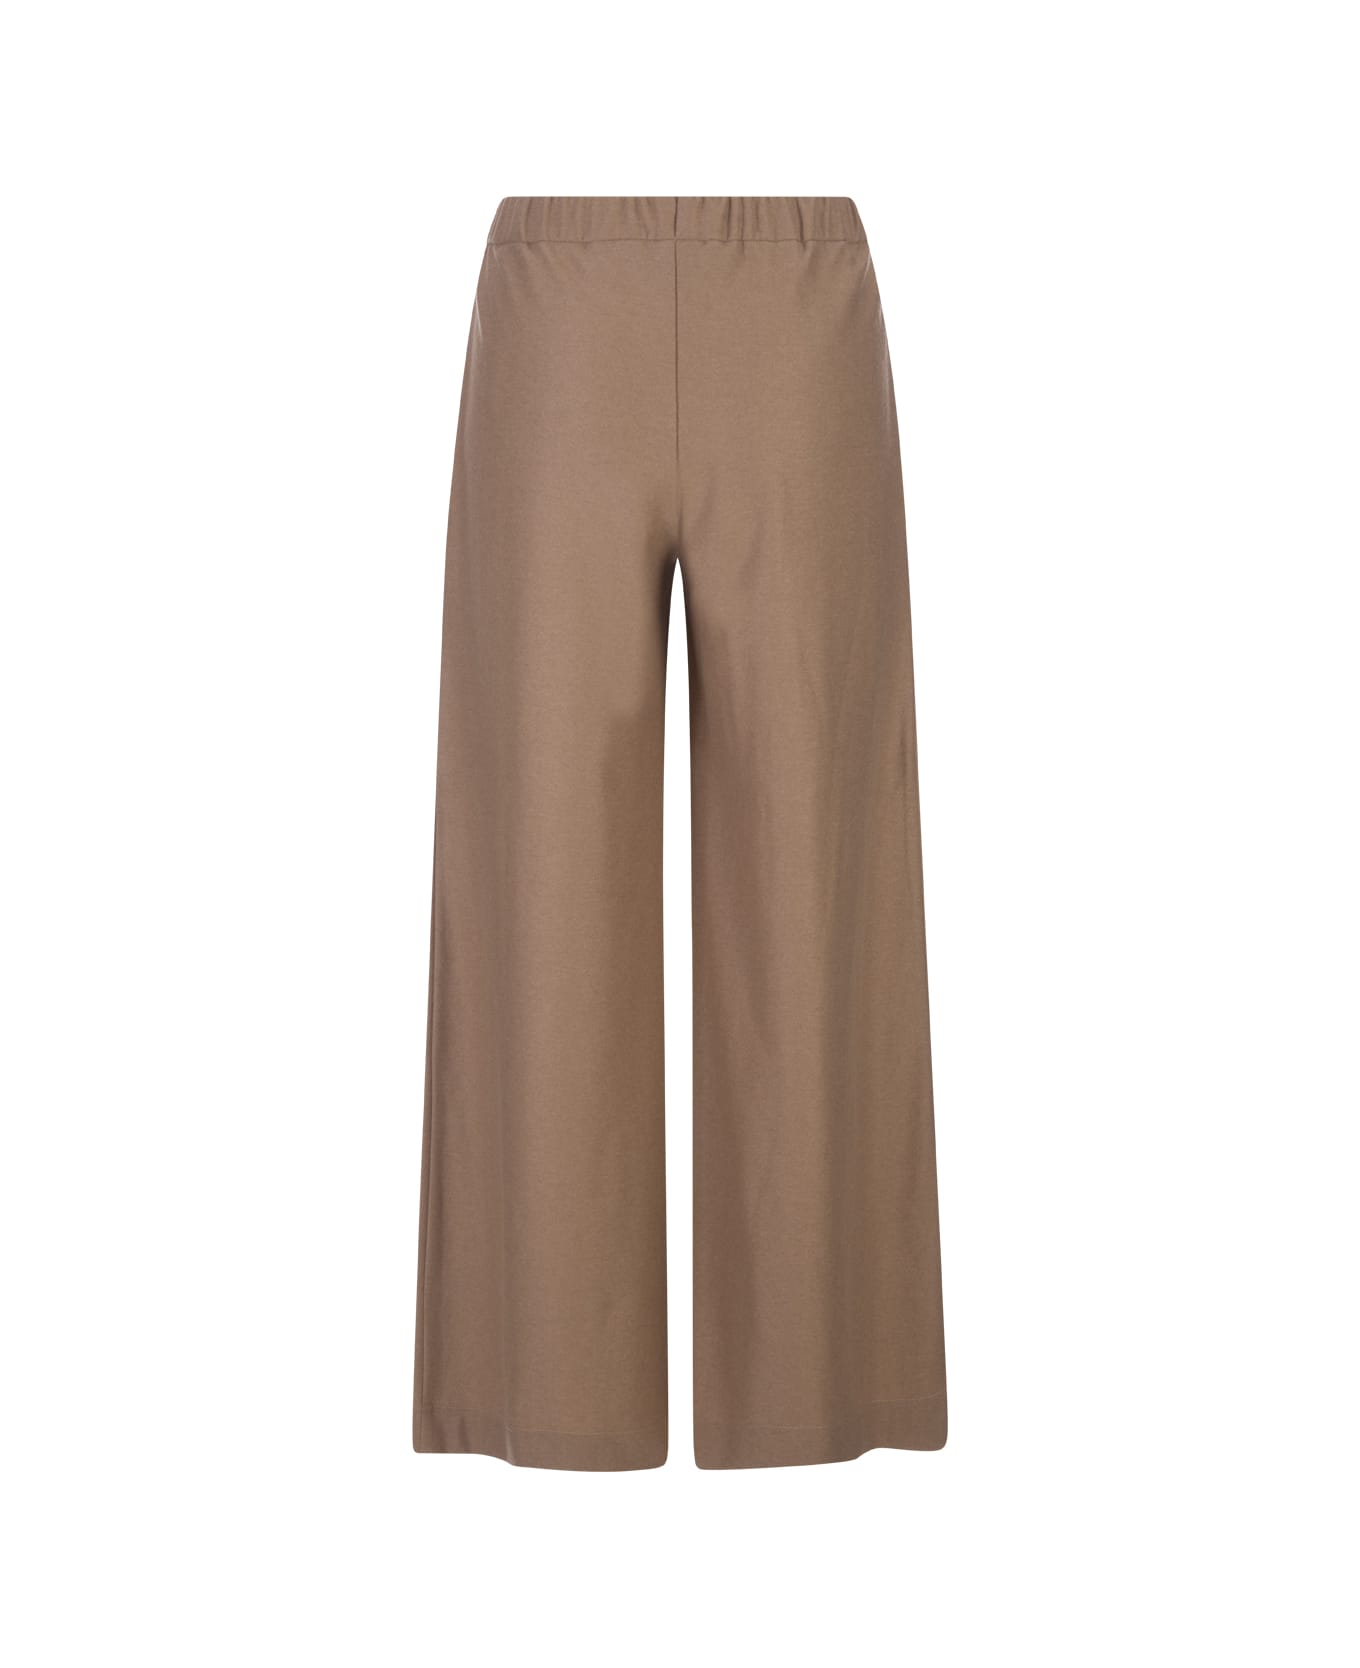 Fedeli Camel Cashmere Wide Trousers - Brown ボトムス